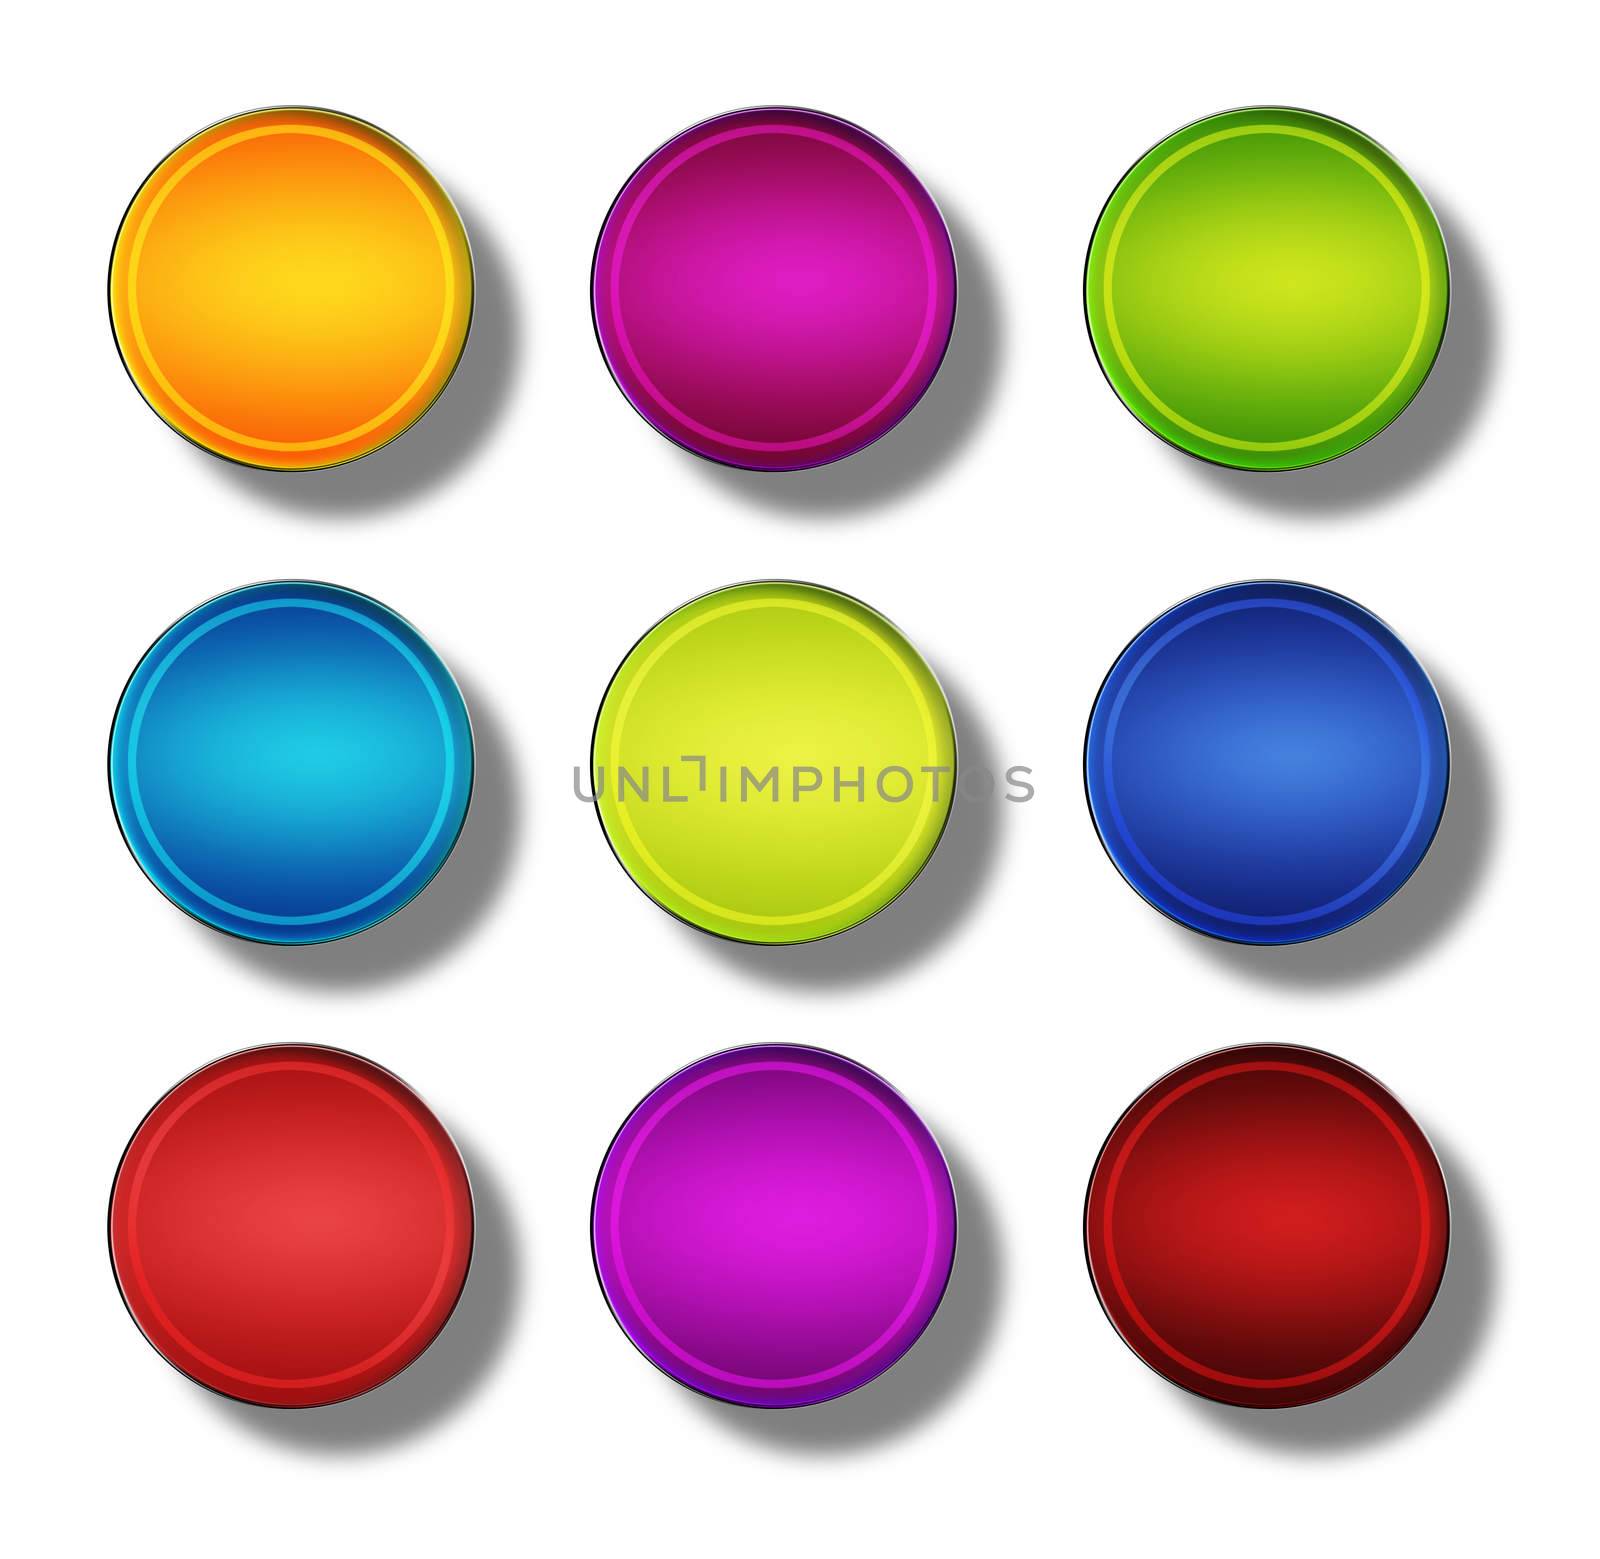 Set of web buttons made ������of glass, shiny, colorful, round